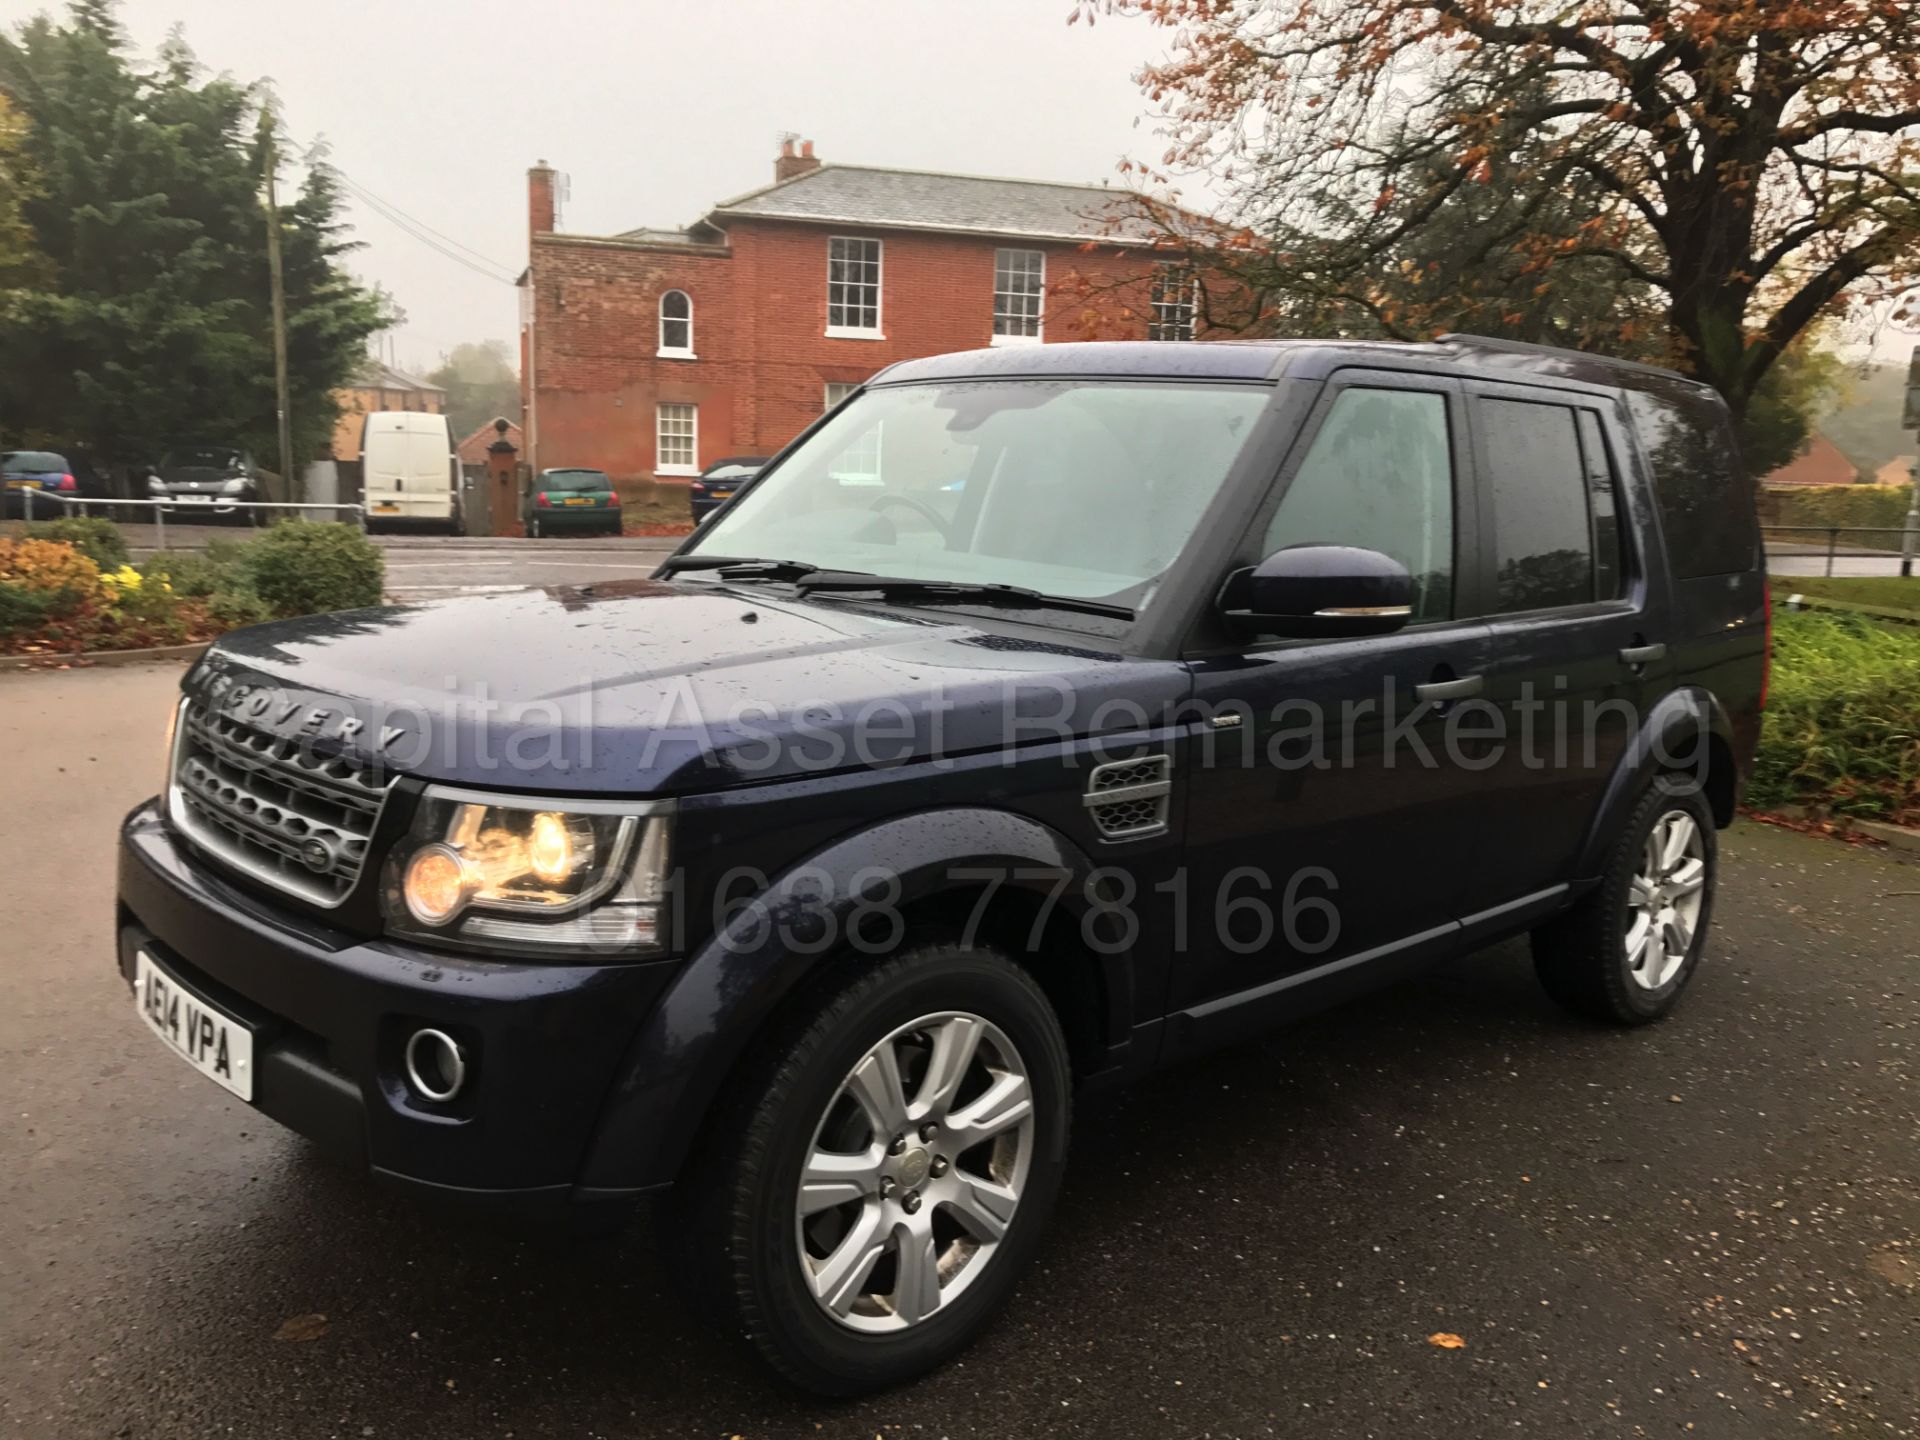 ON SALE LAND ROVER DISCOVERY 4 (2014) '3.0 SDV6 - 8 SPEED AUTO - LEATHER - SAT NAV -7 SEATER'1 OWNER - Image 5 of 41